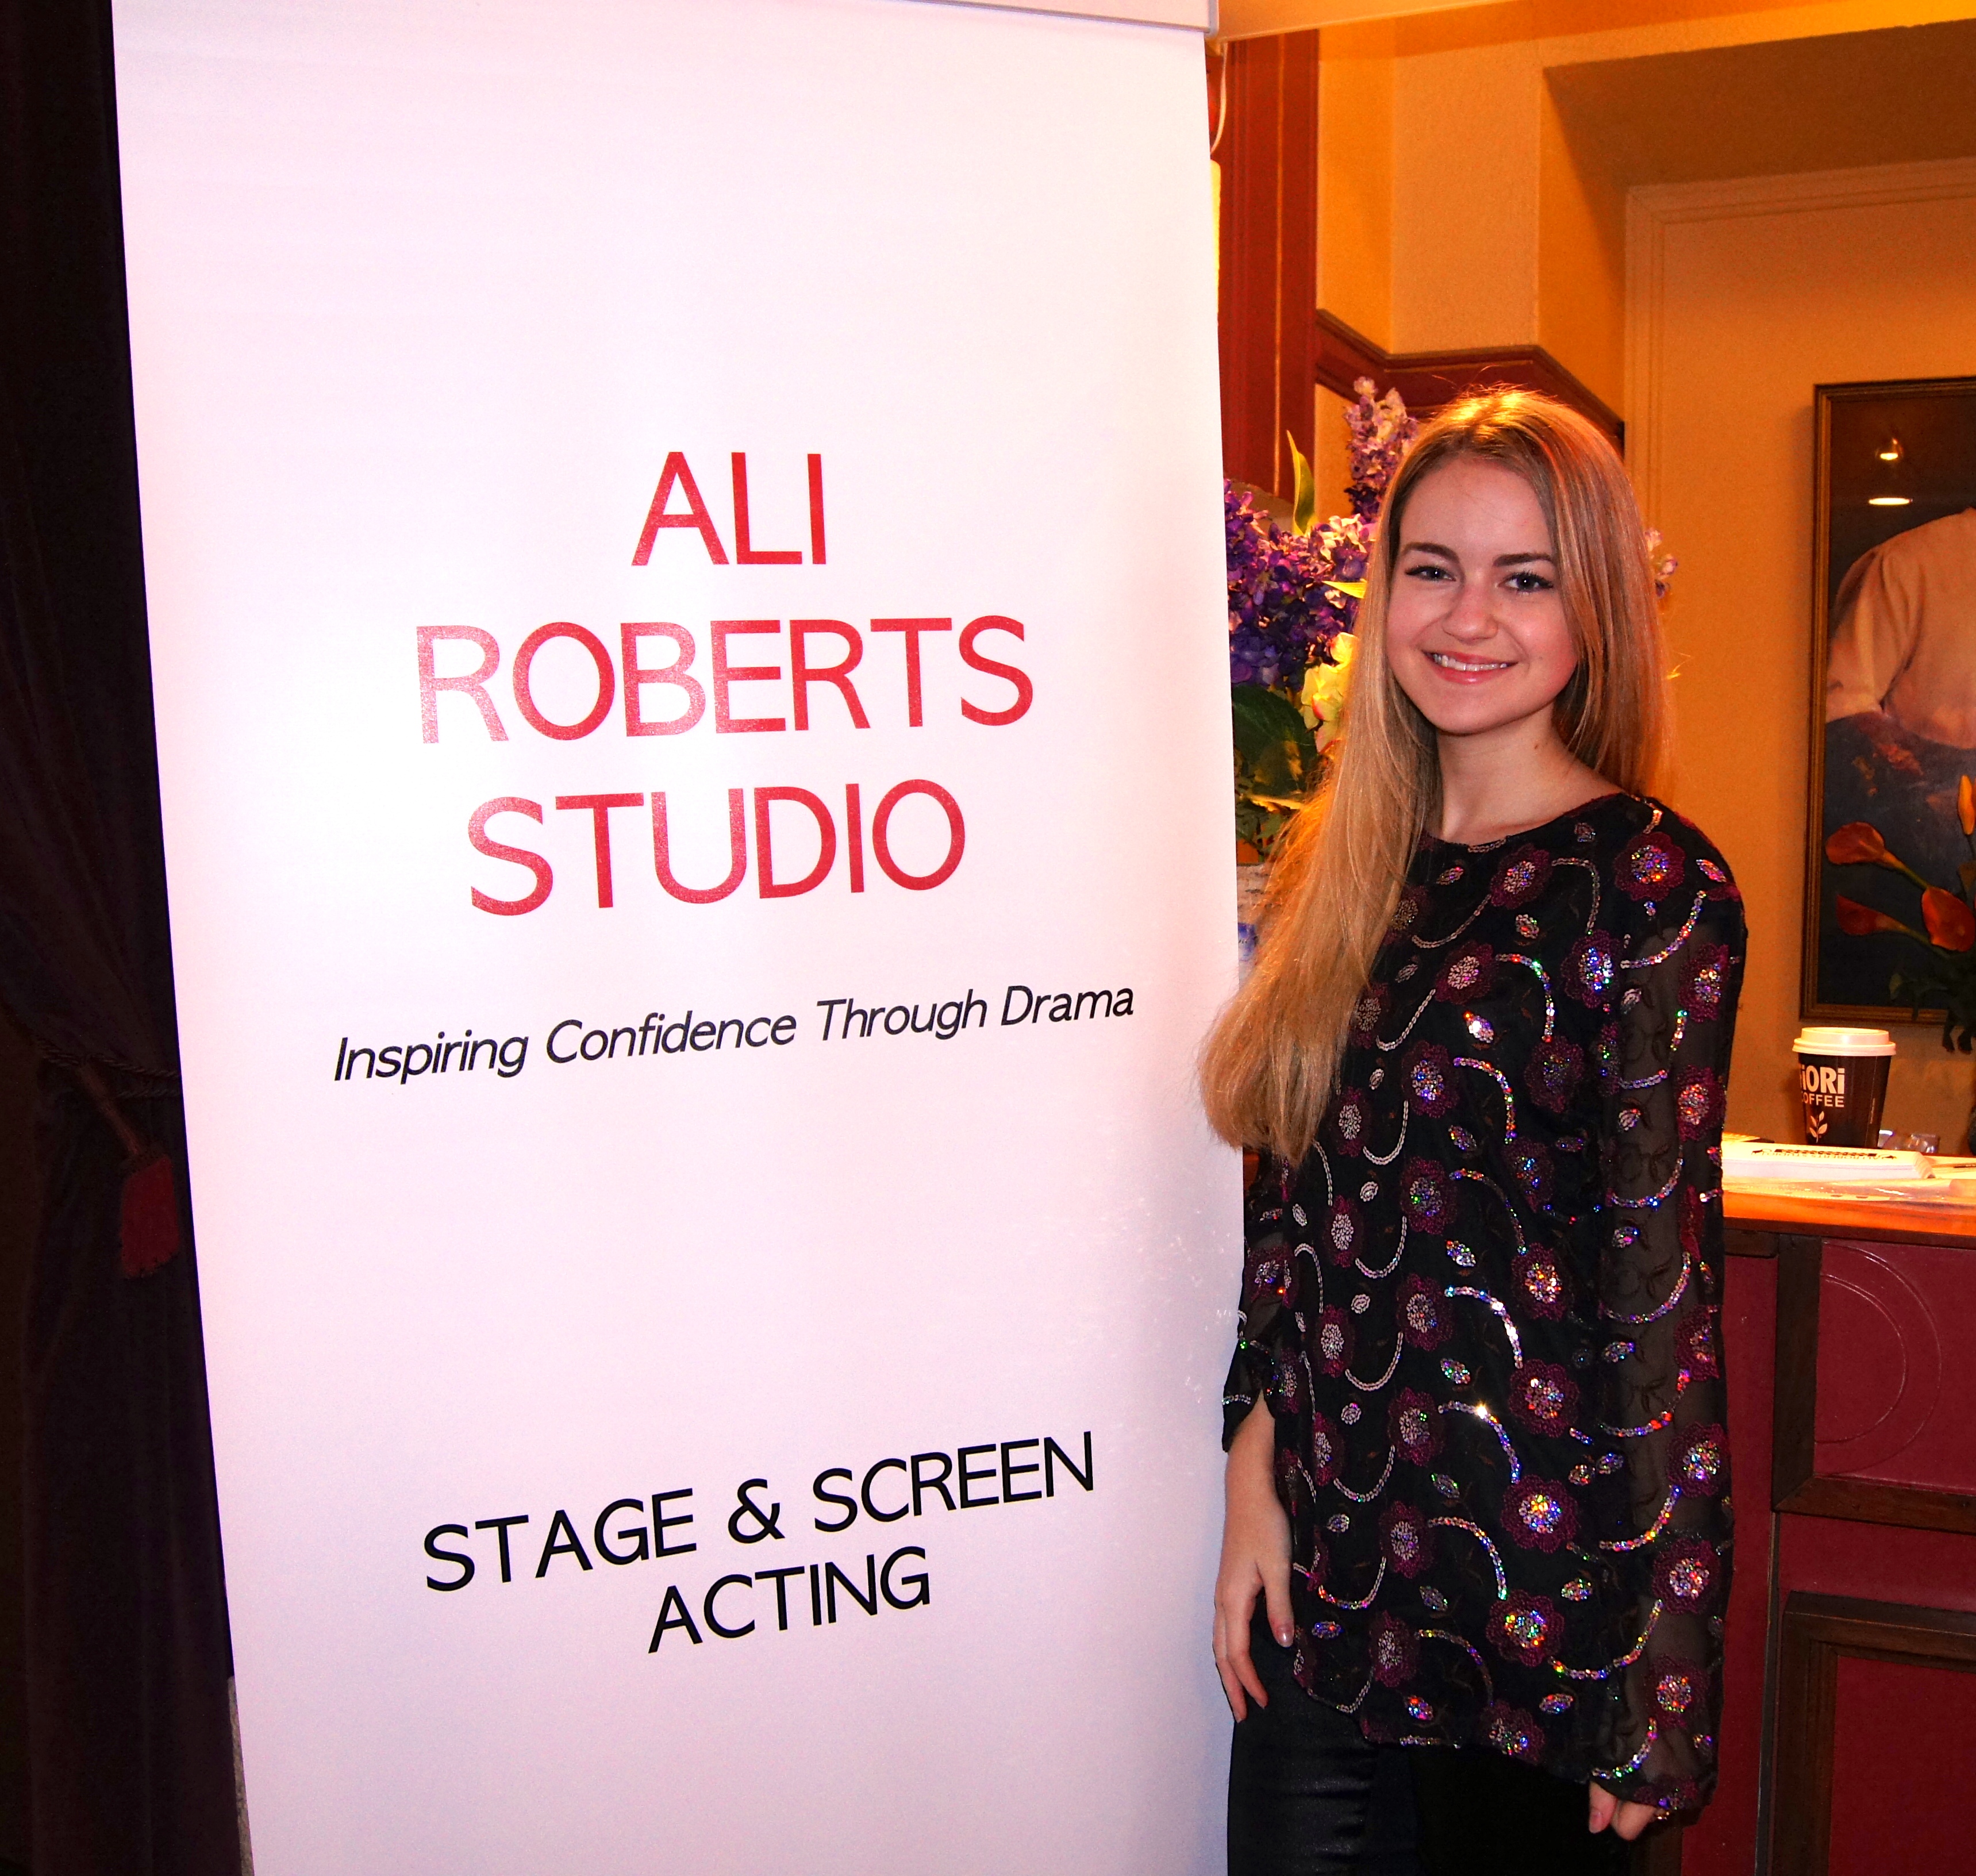 @Ali Roberts Studio where Chelsea is a student and teacher